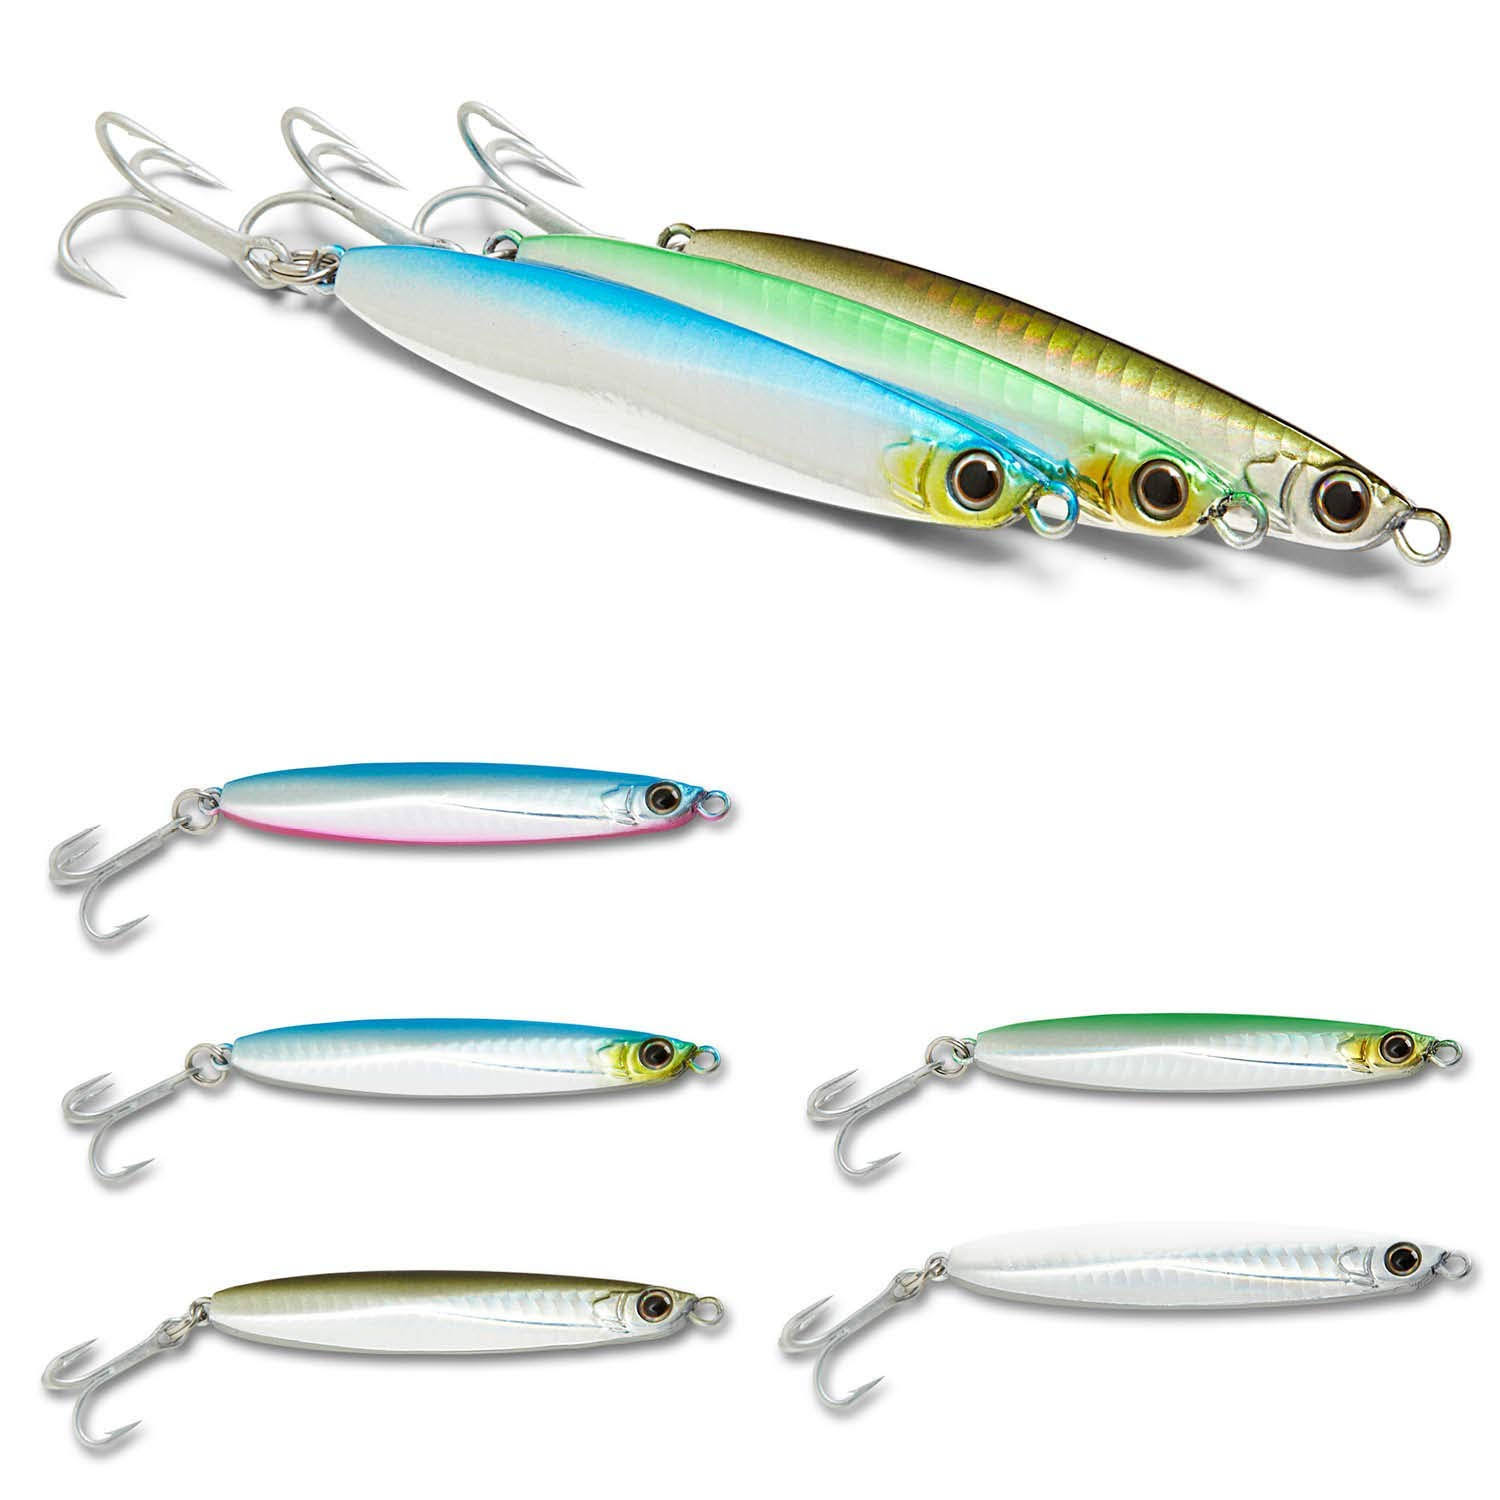 Shimano Coltsniper Jig Slow Fall Lure | Boating & Fishing | Free Shipping On All Orders | Delivery Guaranteed | Best Price Guarantee